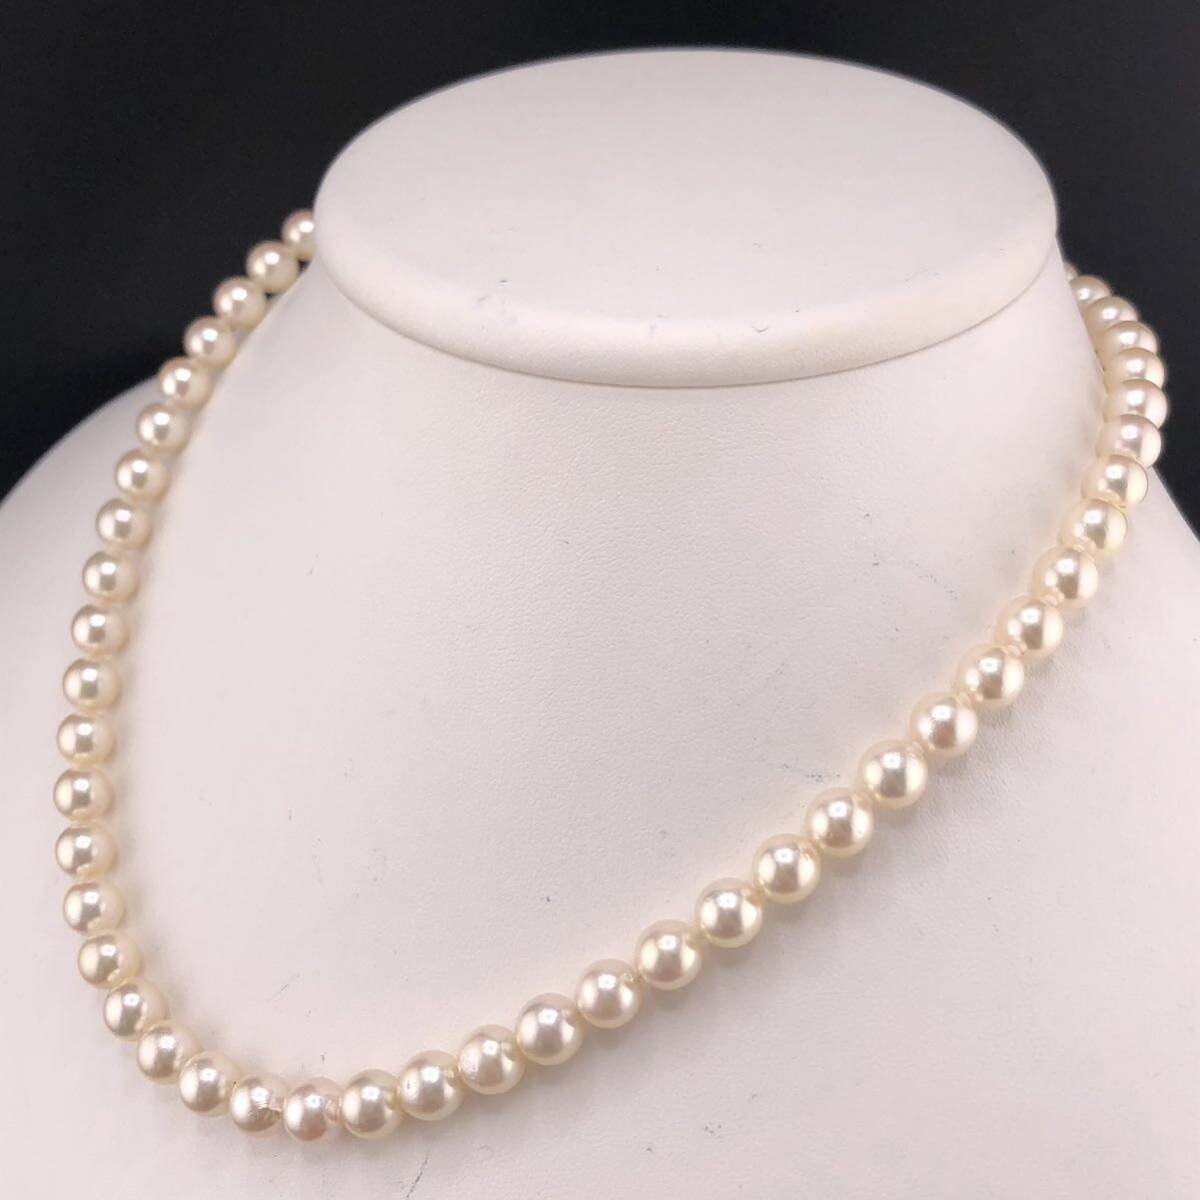 P04-0018 アコヤパールネックレス 7.0mm~7.5mm 42cm 33g ( アコヤ真珠 Pearl necklace SILVER )の画像2